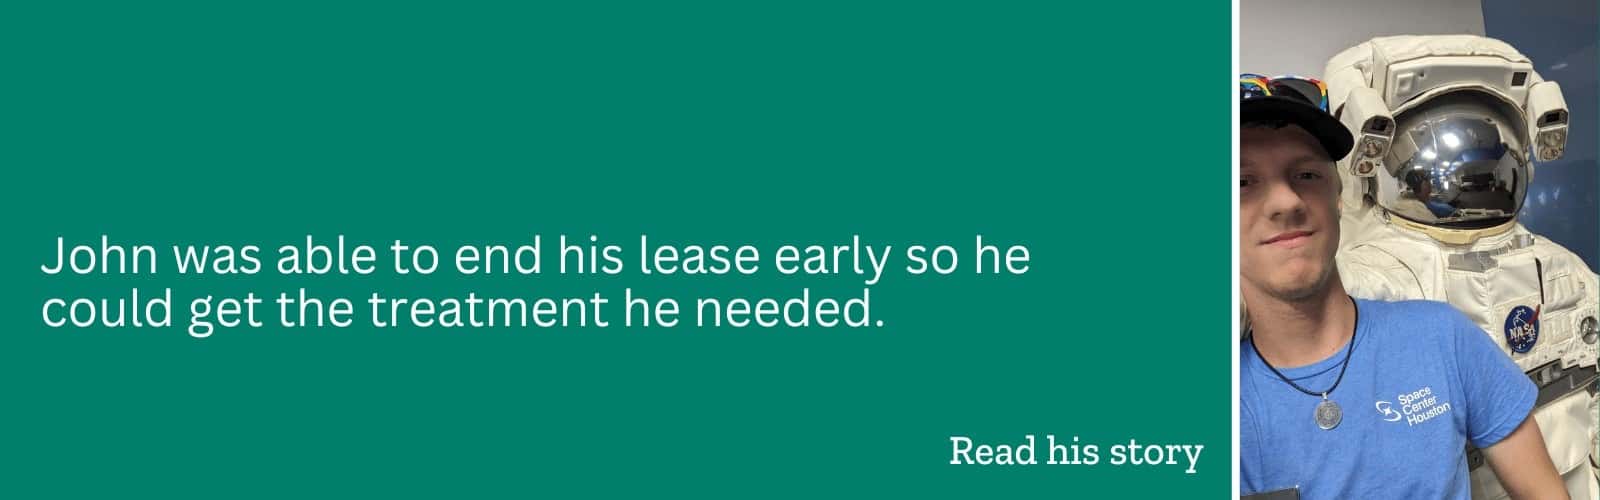 Learn how John was able to end his lease early so he could get the treatment he needed.